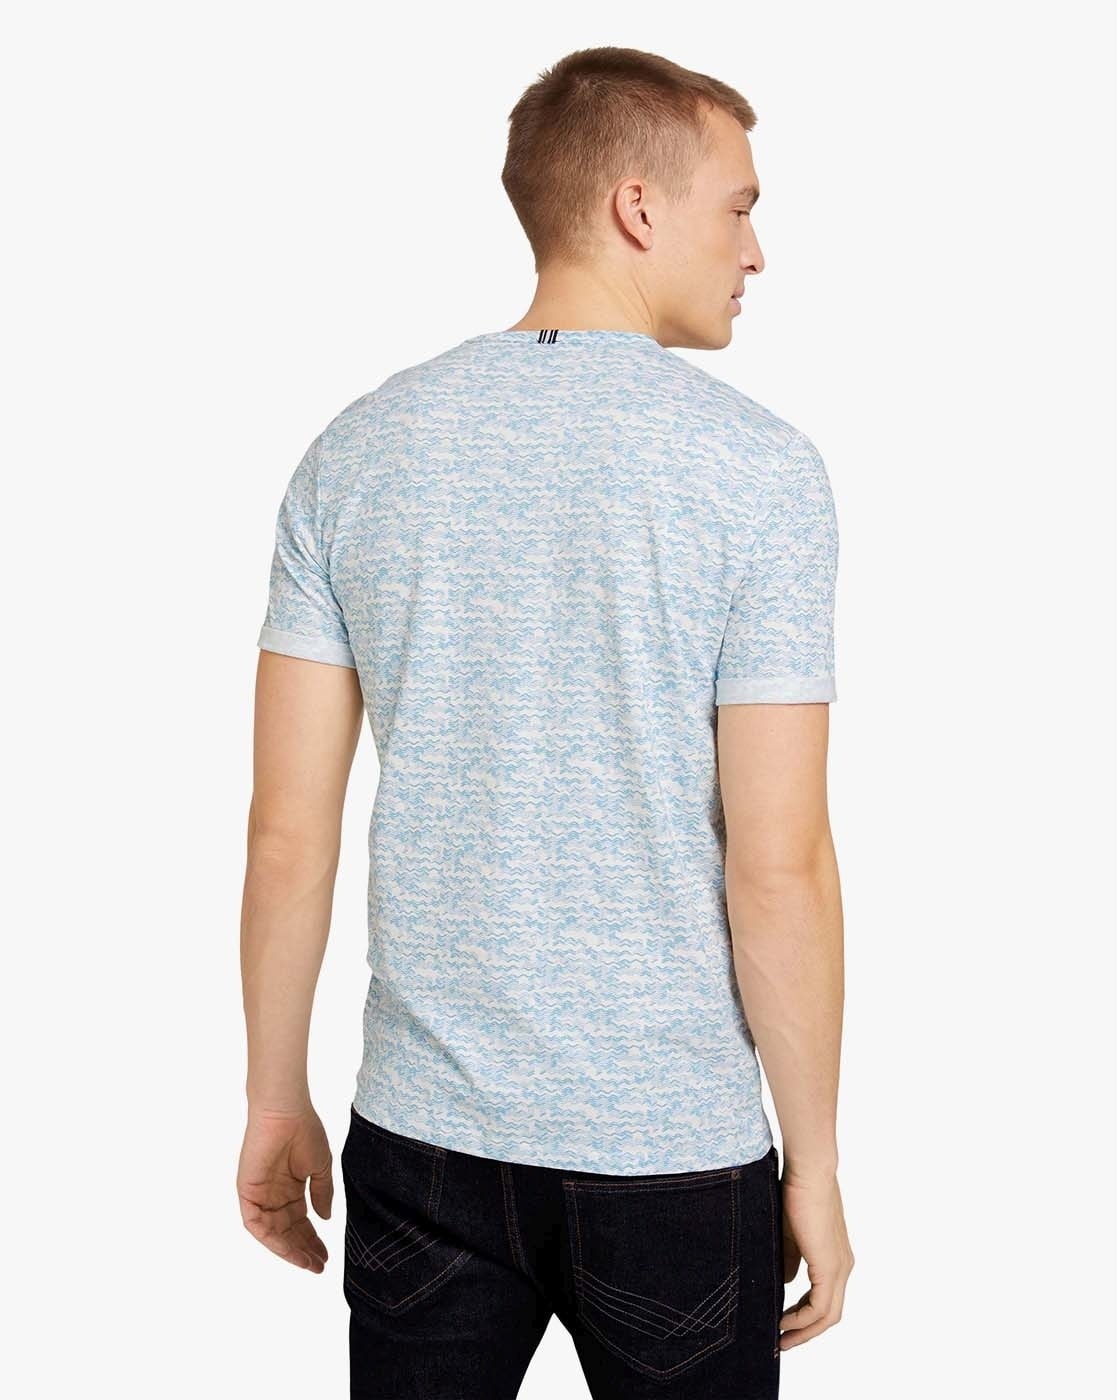 Buy Blue Tshirts for Online Tailor Tom by Men